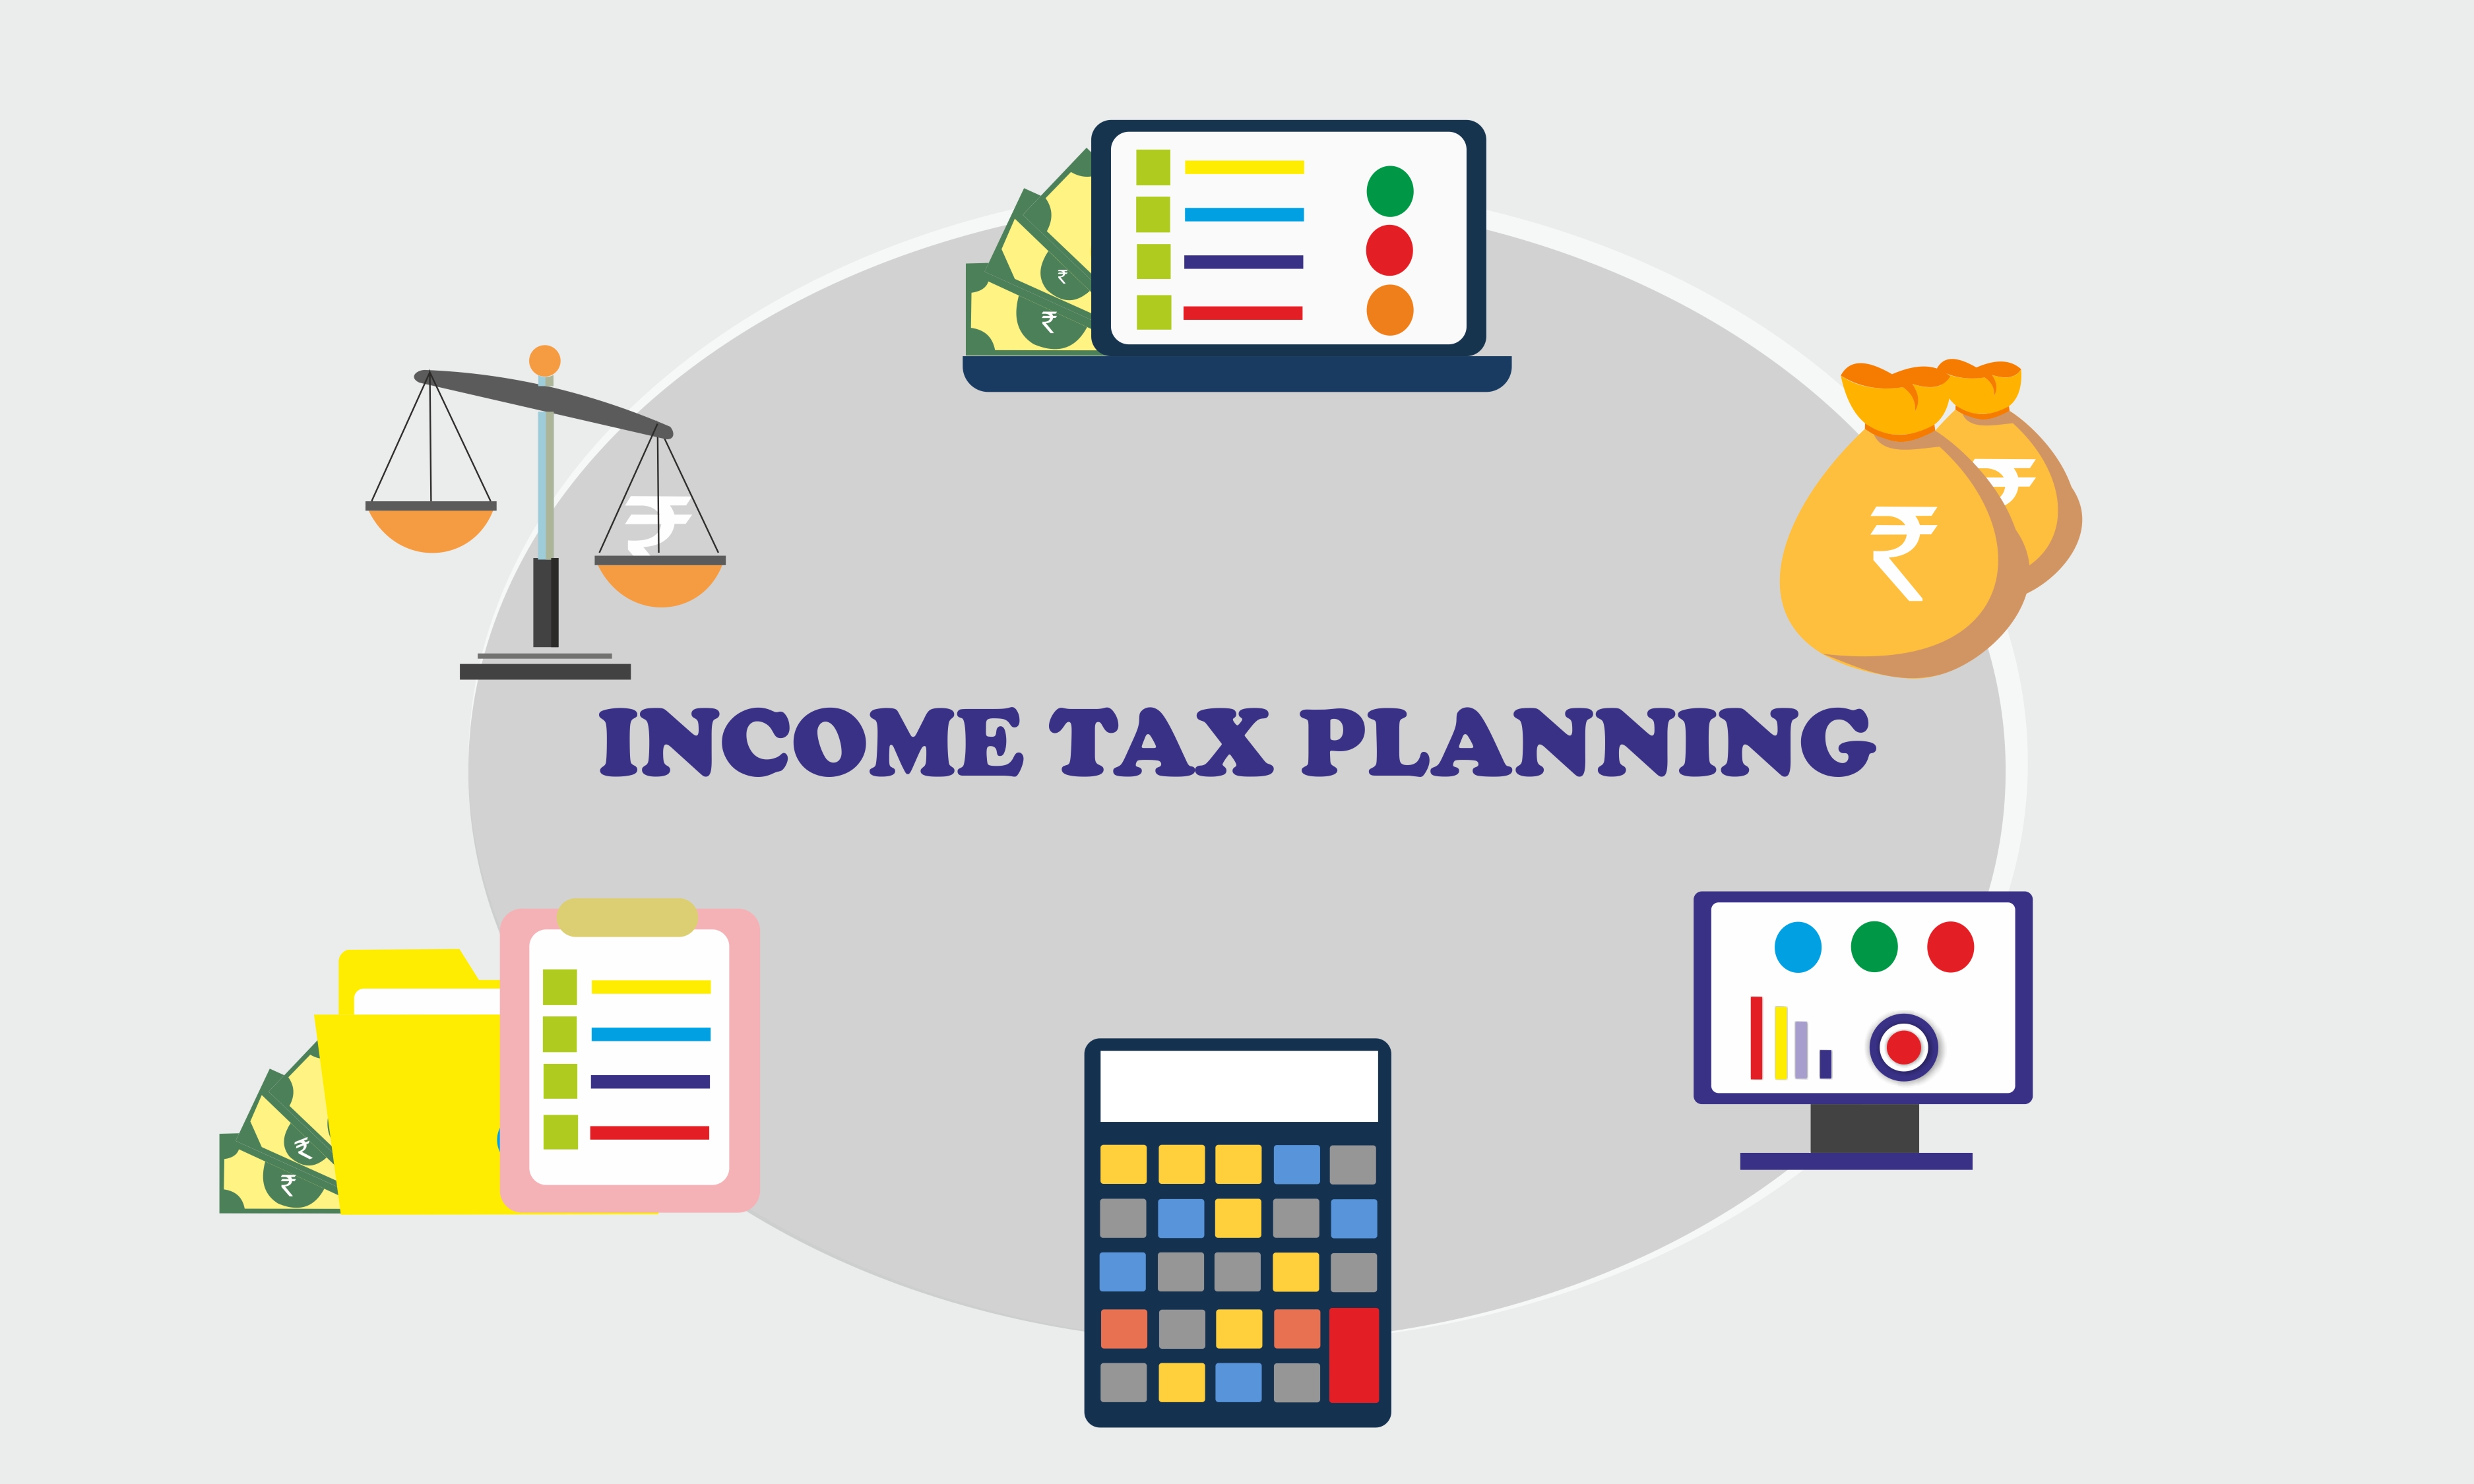 Income Tax Planning: Common mistakes to avoid as March 31 deadline nears